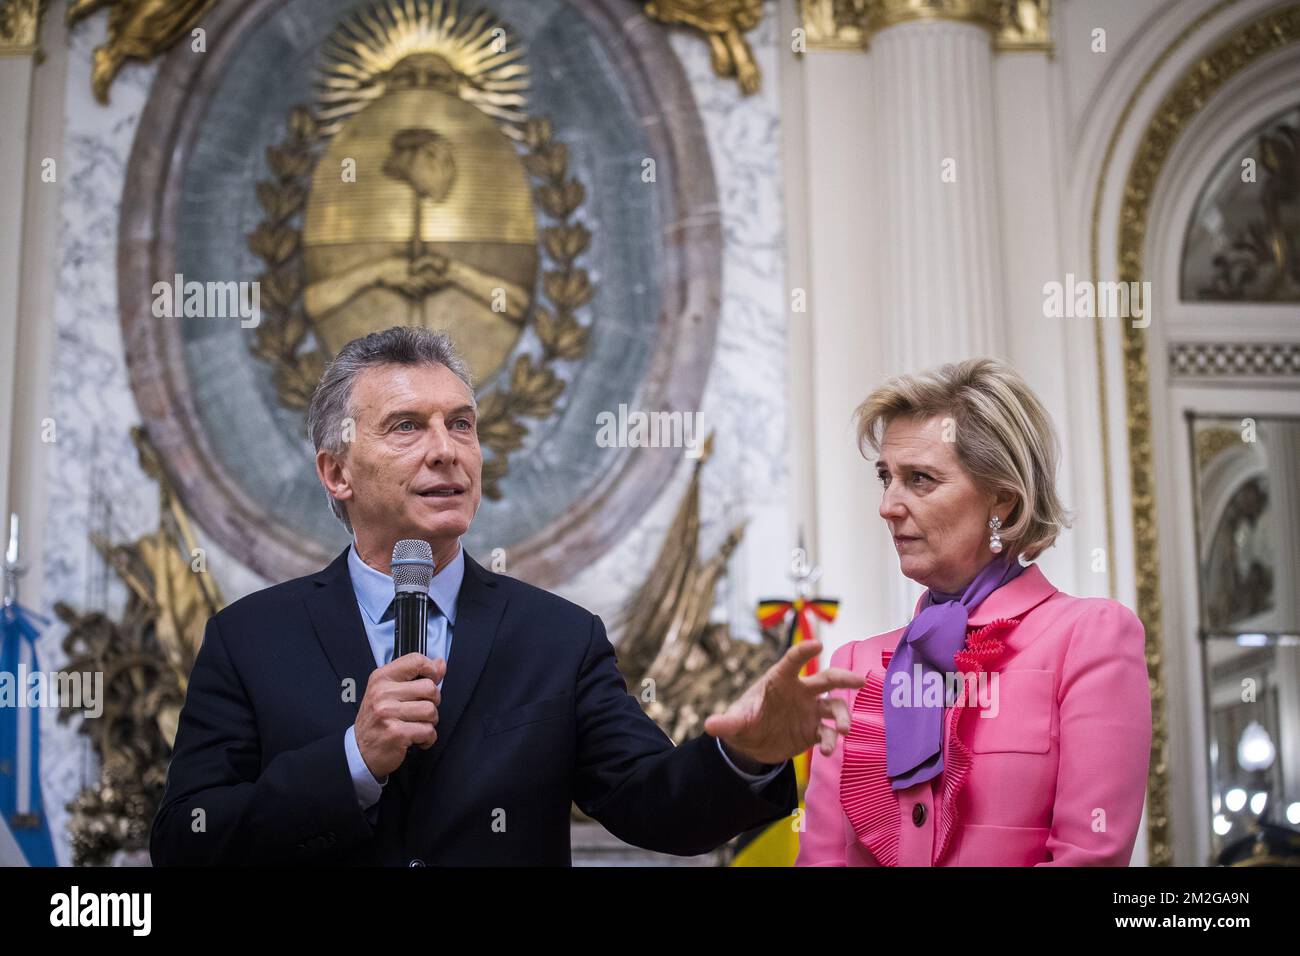 President of Argentina Mauricio Macri and Princess Astrid of Belgium pictured during a meeting with the President of Argentina on the second day of a Belgian Economic mission to Argentina, Tuesday 26 June 2018 in Buenos Aires, Argentina. Several federal and regional ministers accompany the princess on a week-long economic mission to Argentina and Uruguay. BELGA PHOTO LAURIE DIEFFEMBACQ Stock Photo